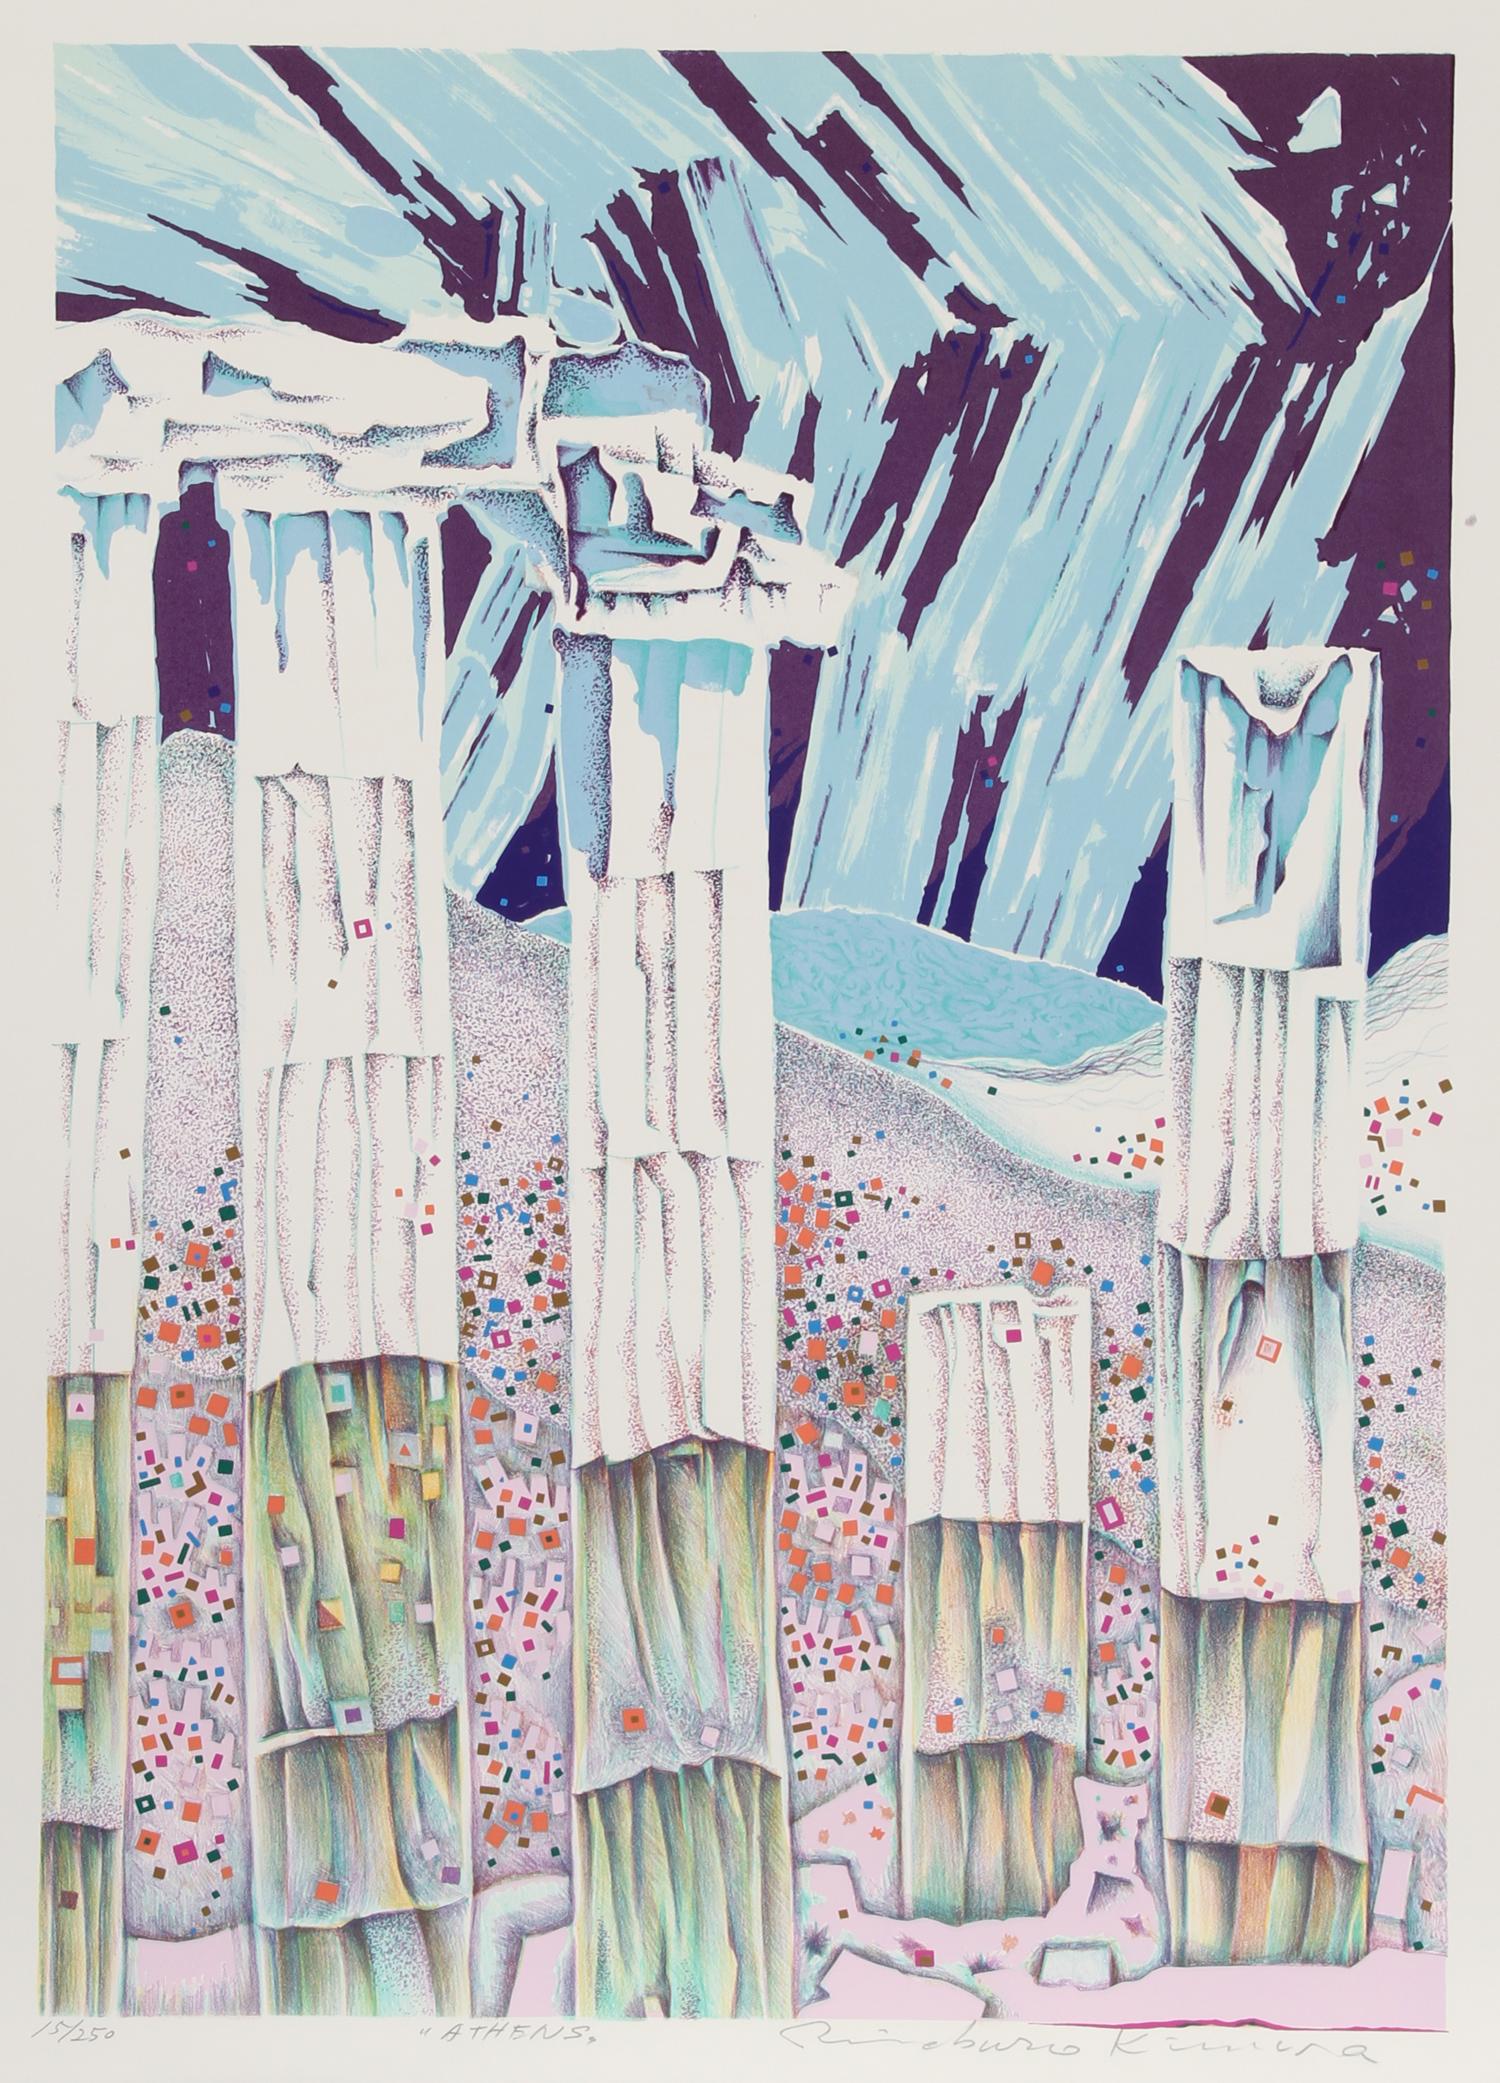 Artist: Risaburo Kimura, Japanese (1924 - )
Title: Athens
Year: 1973
Medium: Silkscreen on BFK Rives, Signed, titled and numbered in pencil
Edition: 250, AP 20
Size: 30 in. x 22 in. (76.2 cm x 55.88 cm)

Printer: Shorewood Atelier